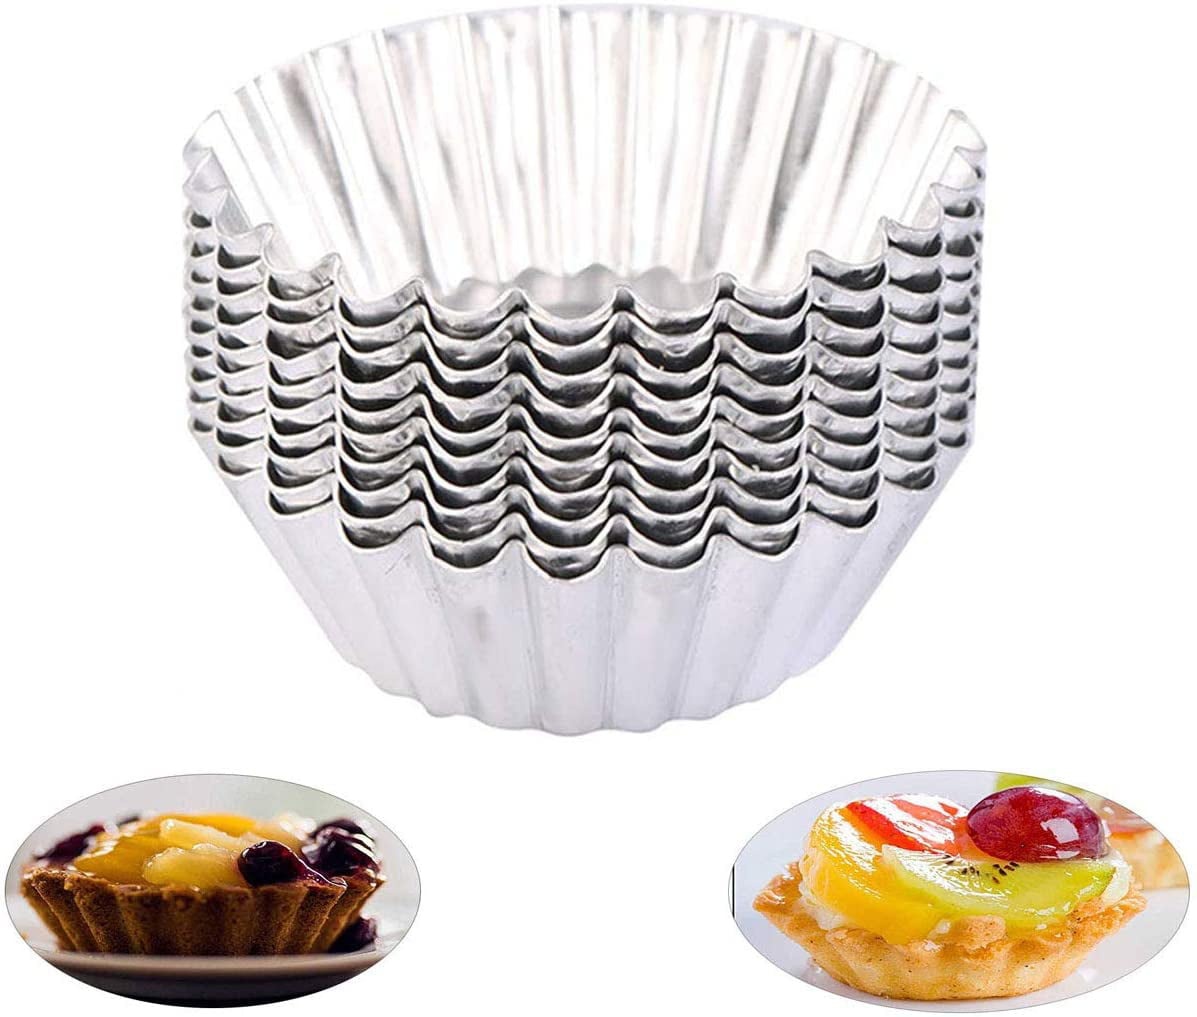 JUDGE Pastry Brush Stainless Steel Handle Great for Pastry/Pies/Tarts/Quiches. 